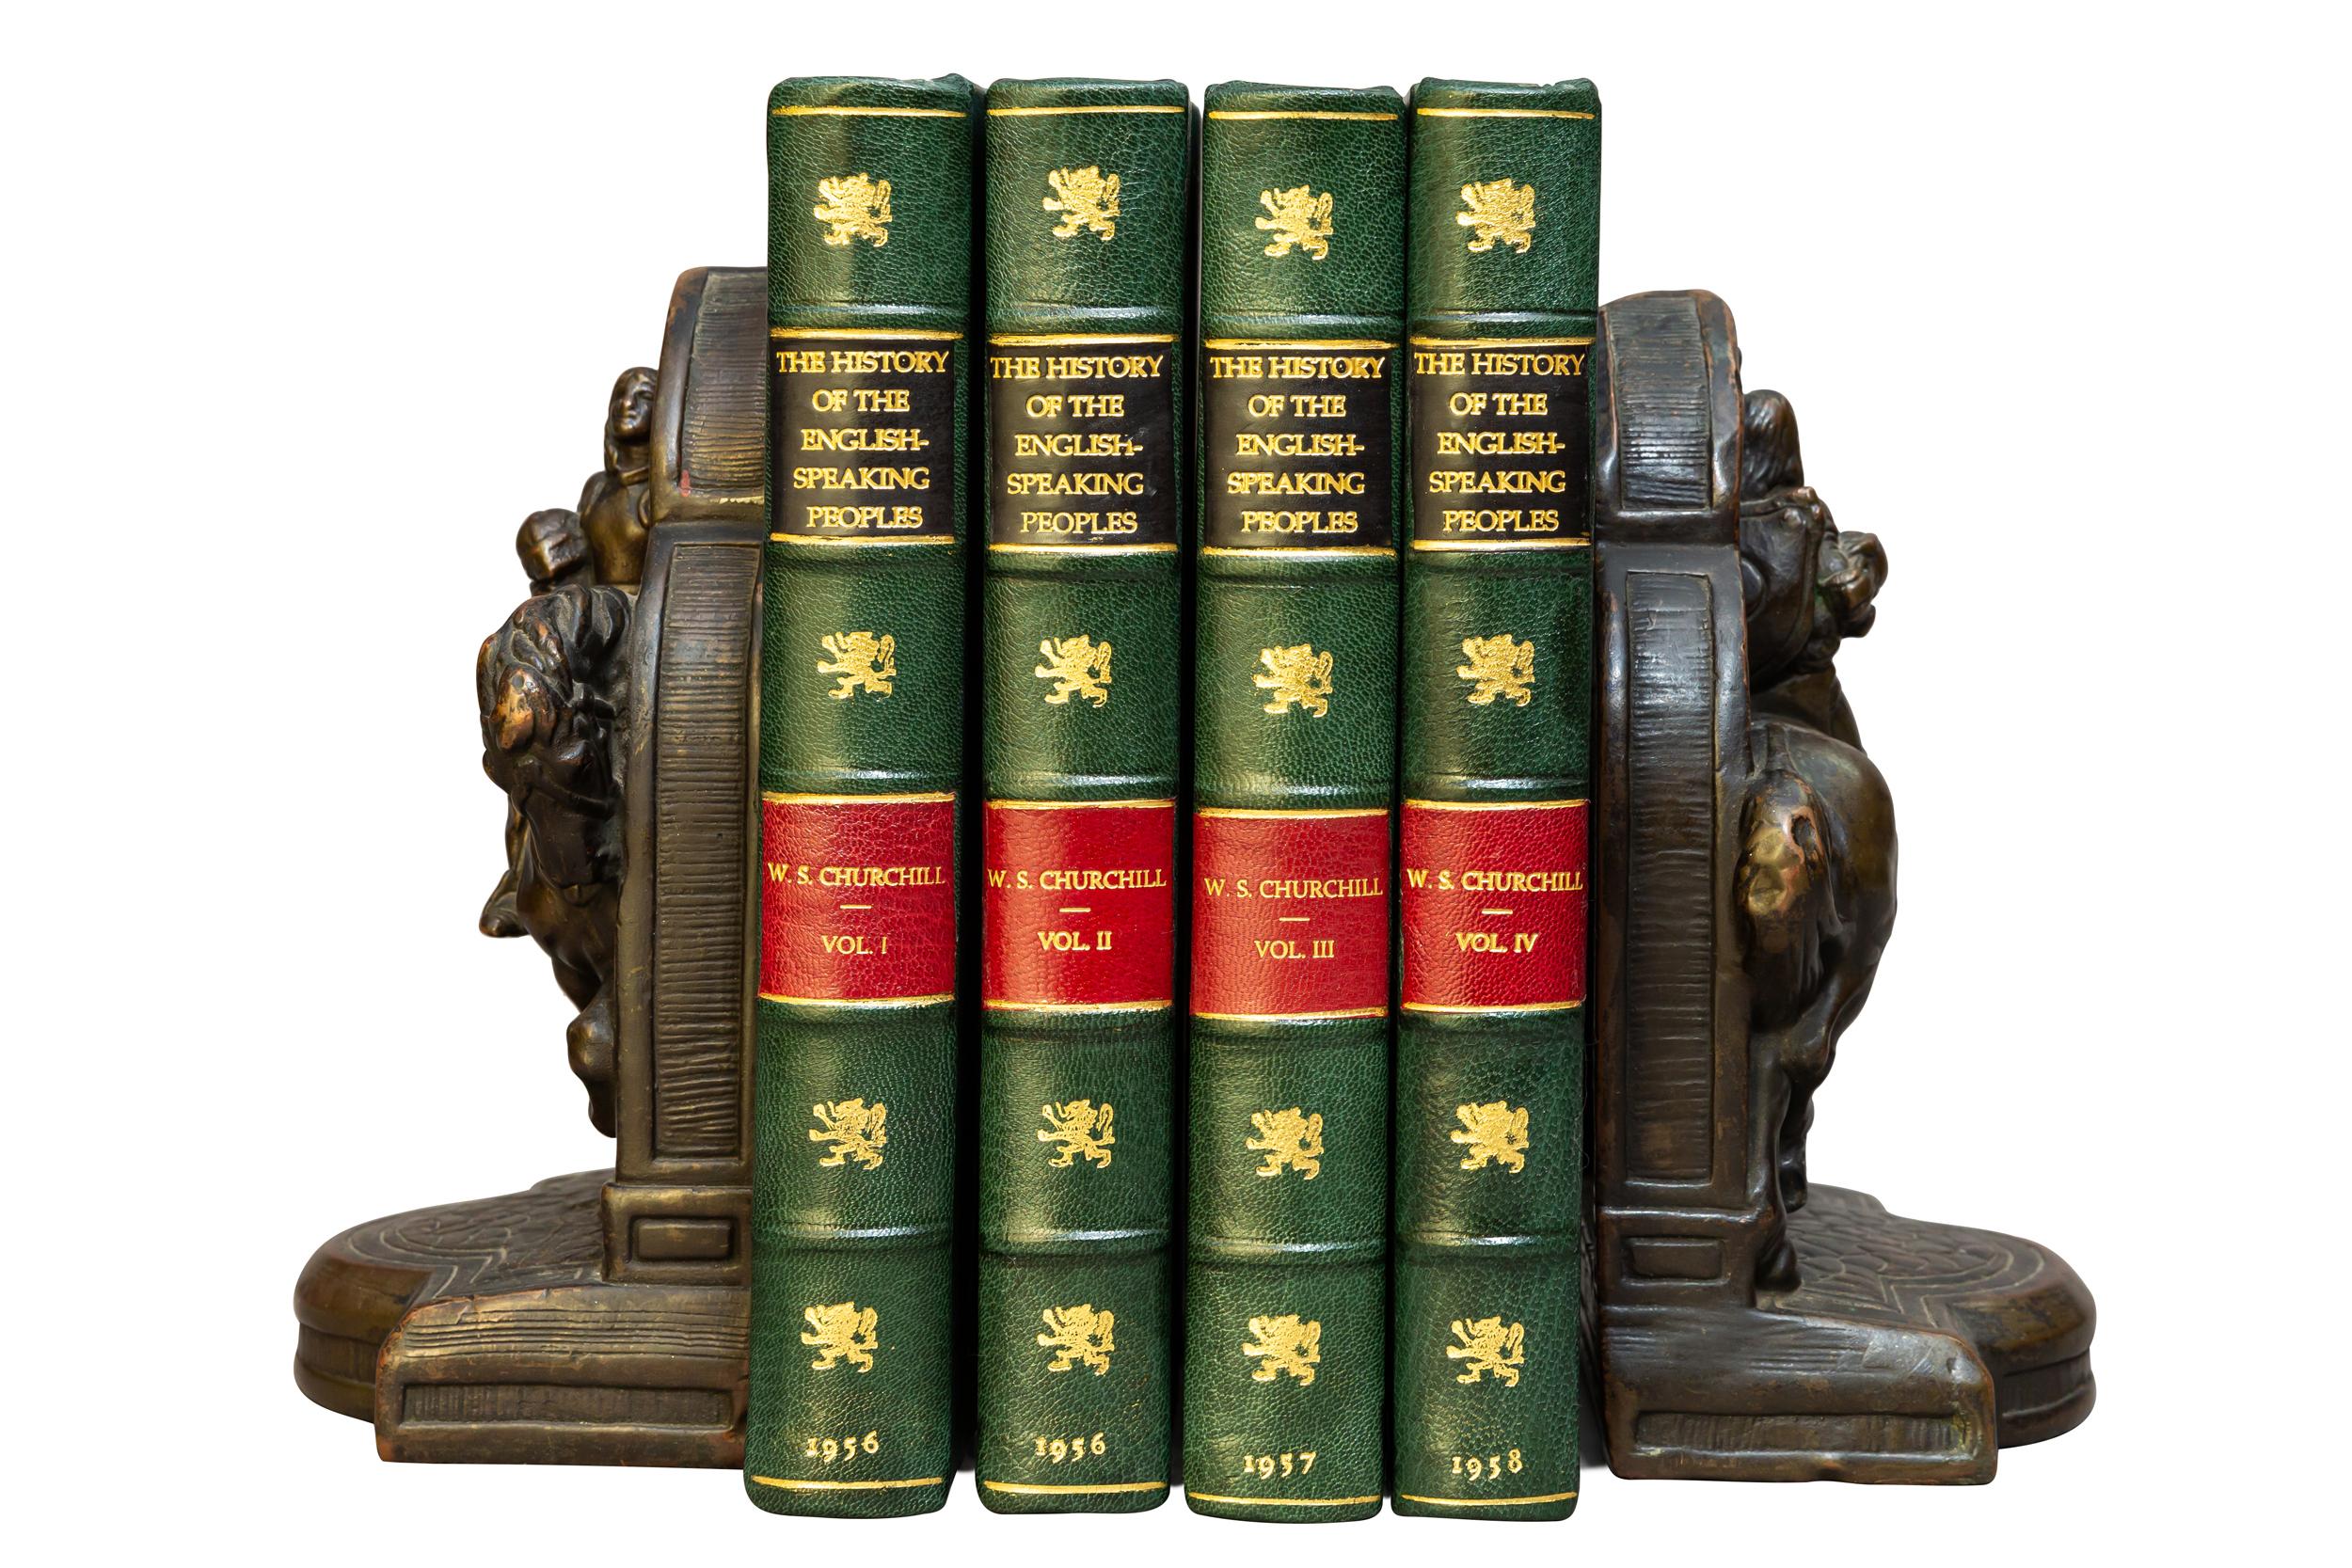 4 volumes. 

Sir Winston S. Churchill. History of The English Speaking Peoples. 

Rebound in 3/4 green morocco, green cloth boards, top edges gilt, raised bands, gilt panels, red labels.

Published: London: Cassell & Co. 1956-1958. First